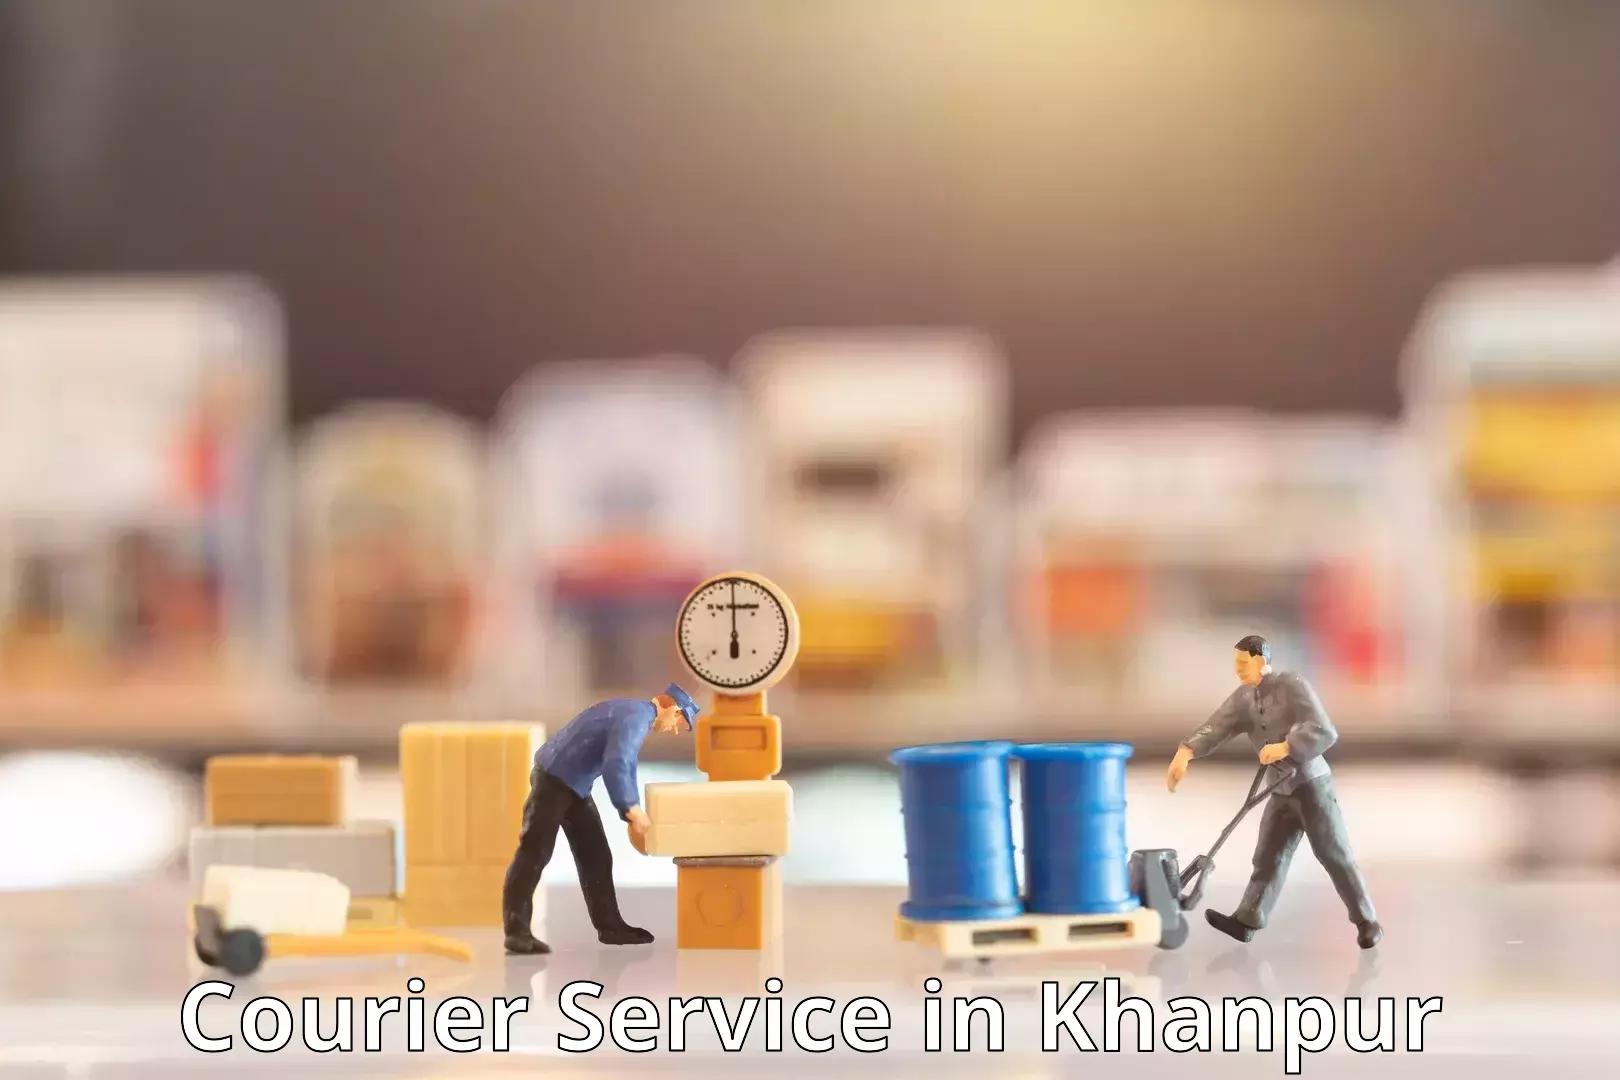 Reliable freight solutions in Khanpur